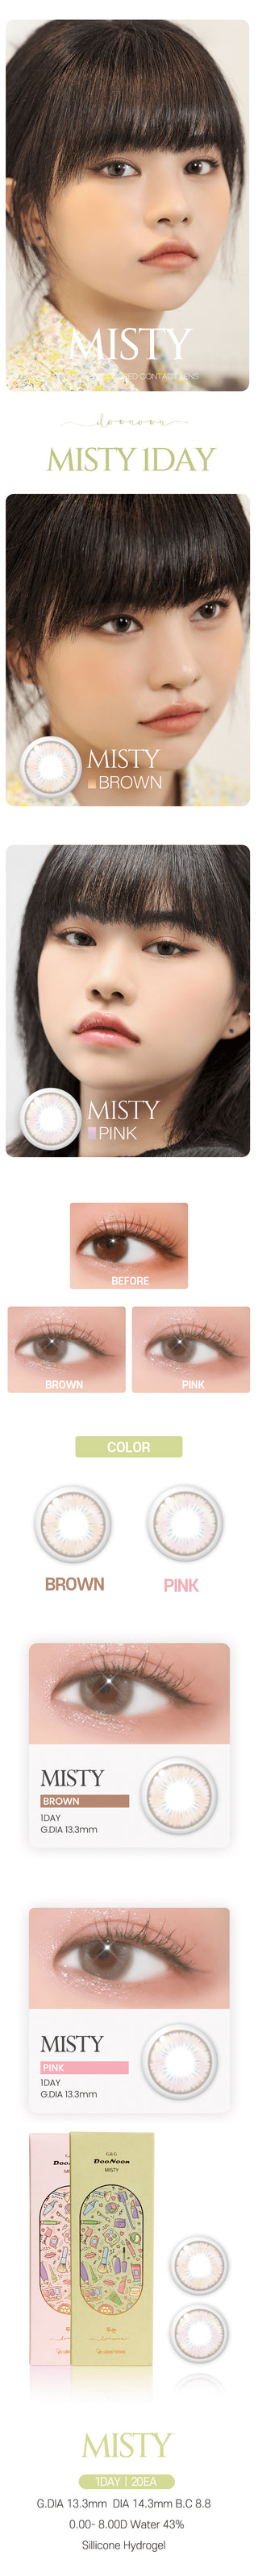 Variety of DooNoon Misty Brown (20pk) contact lens colors displayed, with closeups of an eye wearing the contact lens colors, and with a model wearing the contact lens colors showing realistic eye-enlarging effect from various angles.